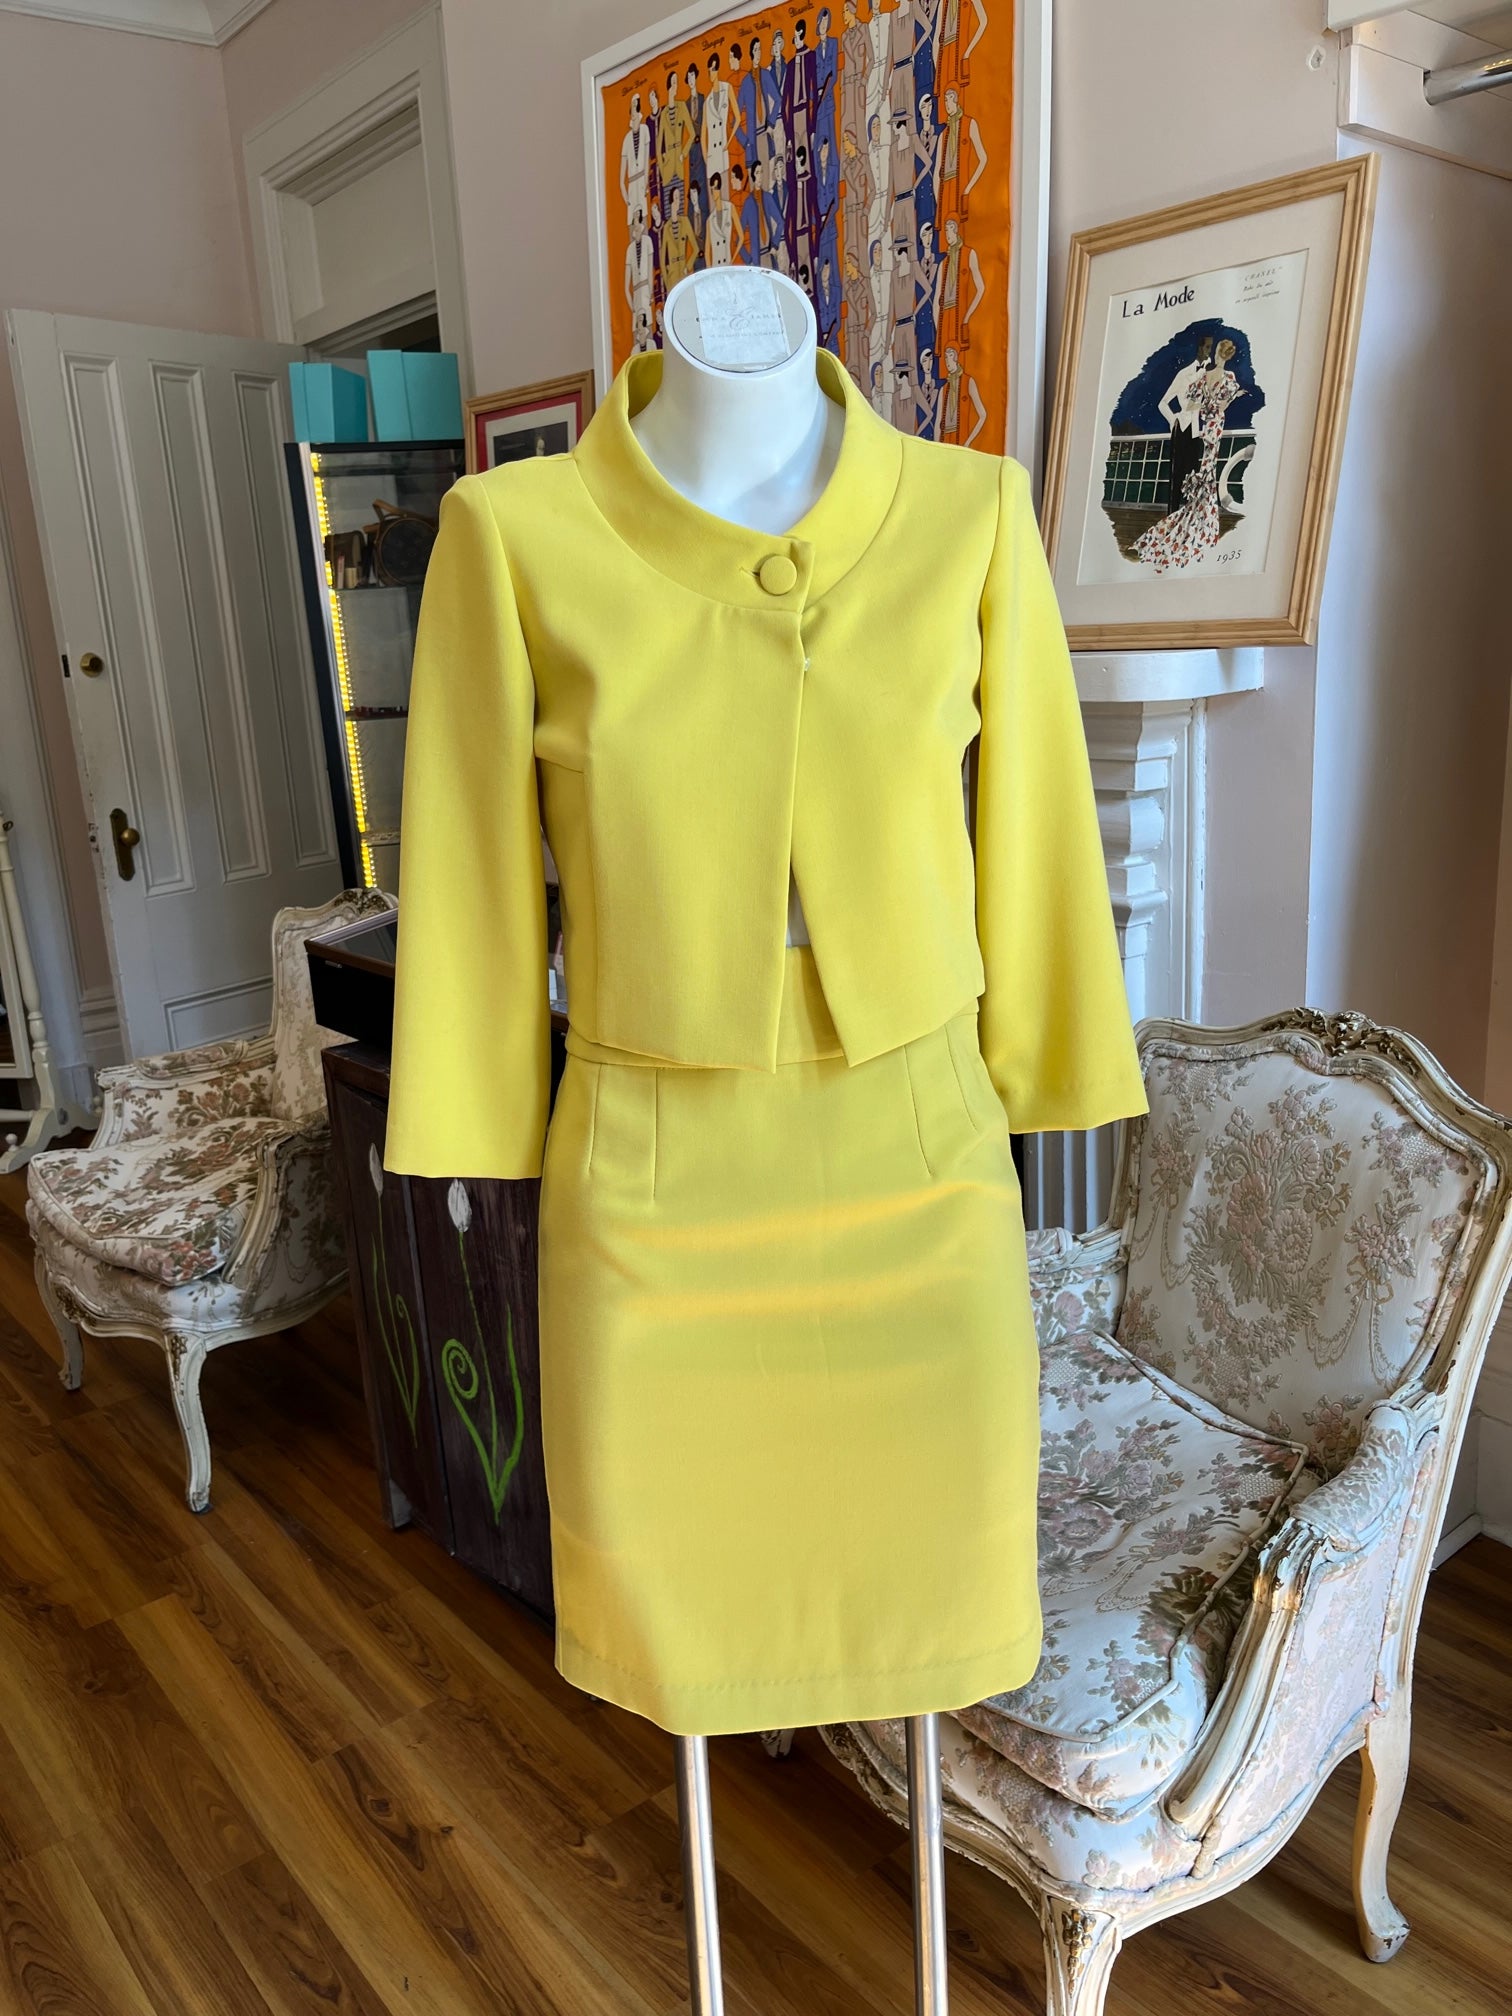 Antonio Cosentino As new Skirt Suit with a 1960s Look (42 Itl)